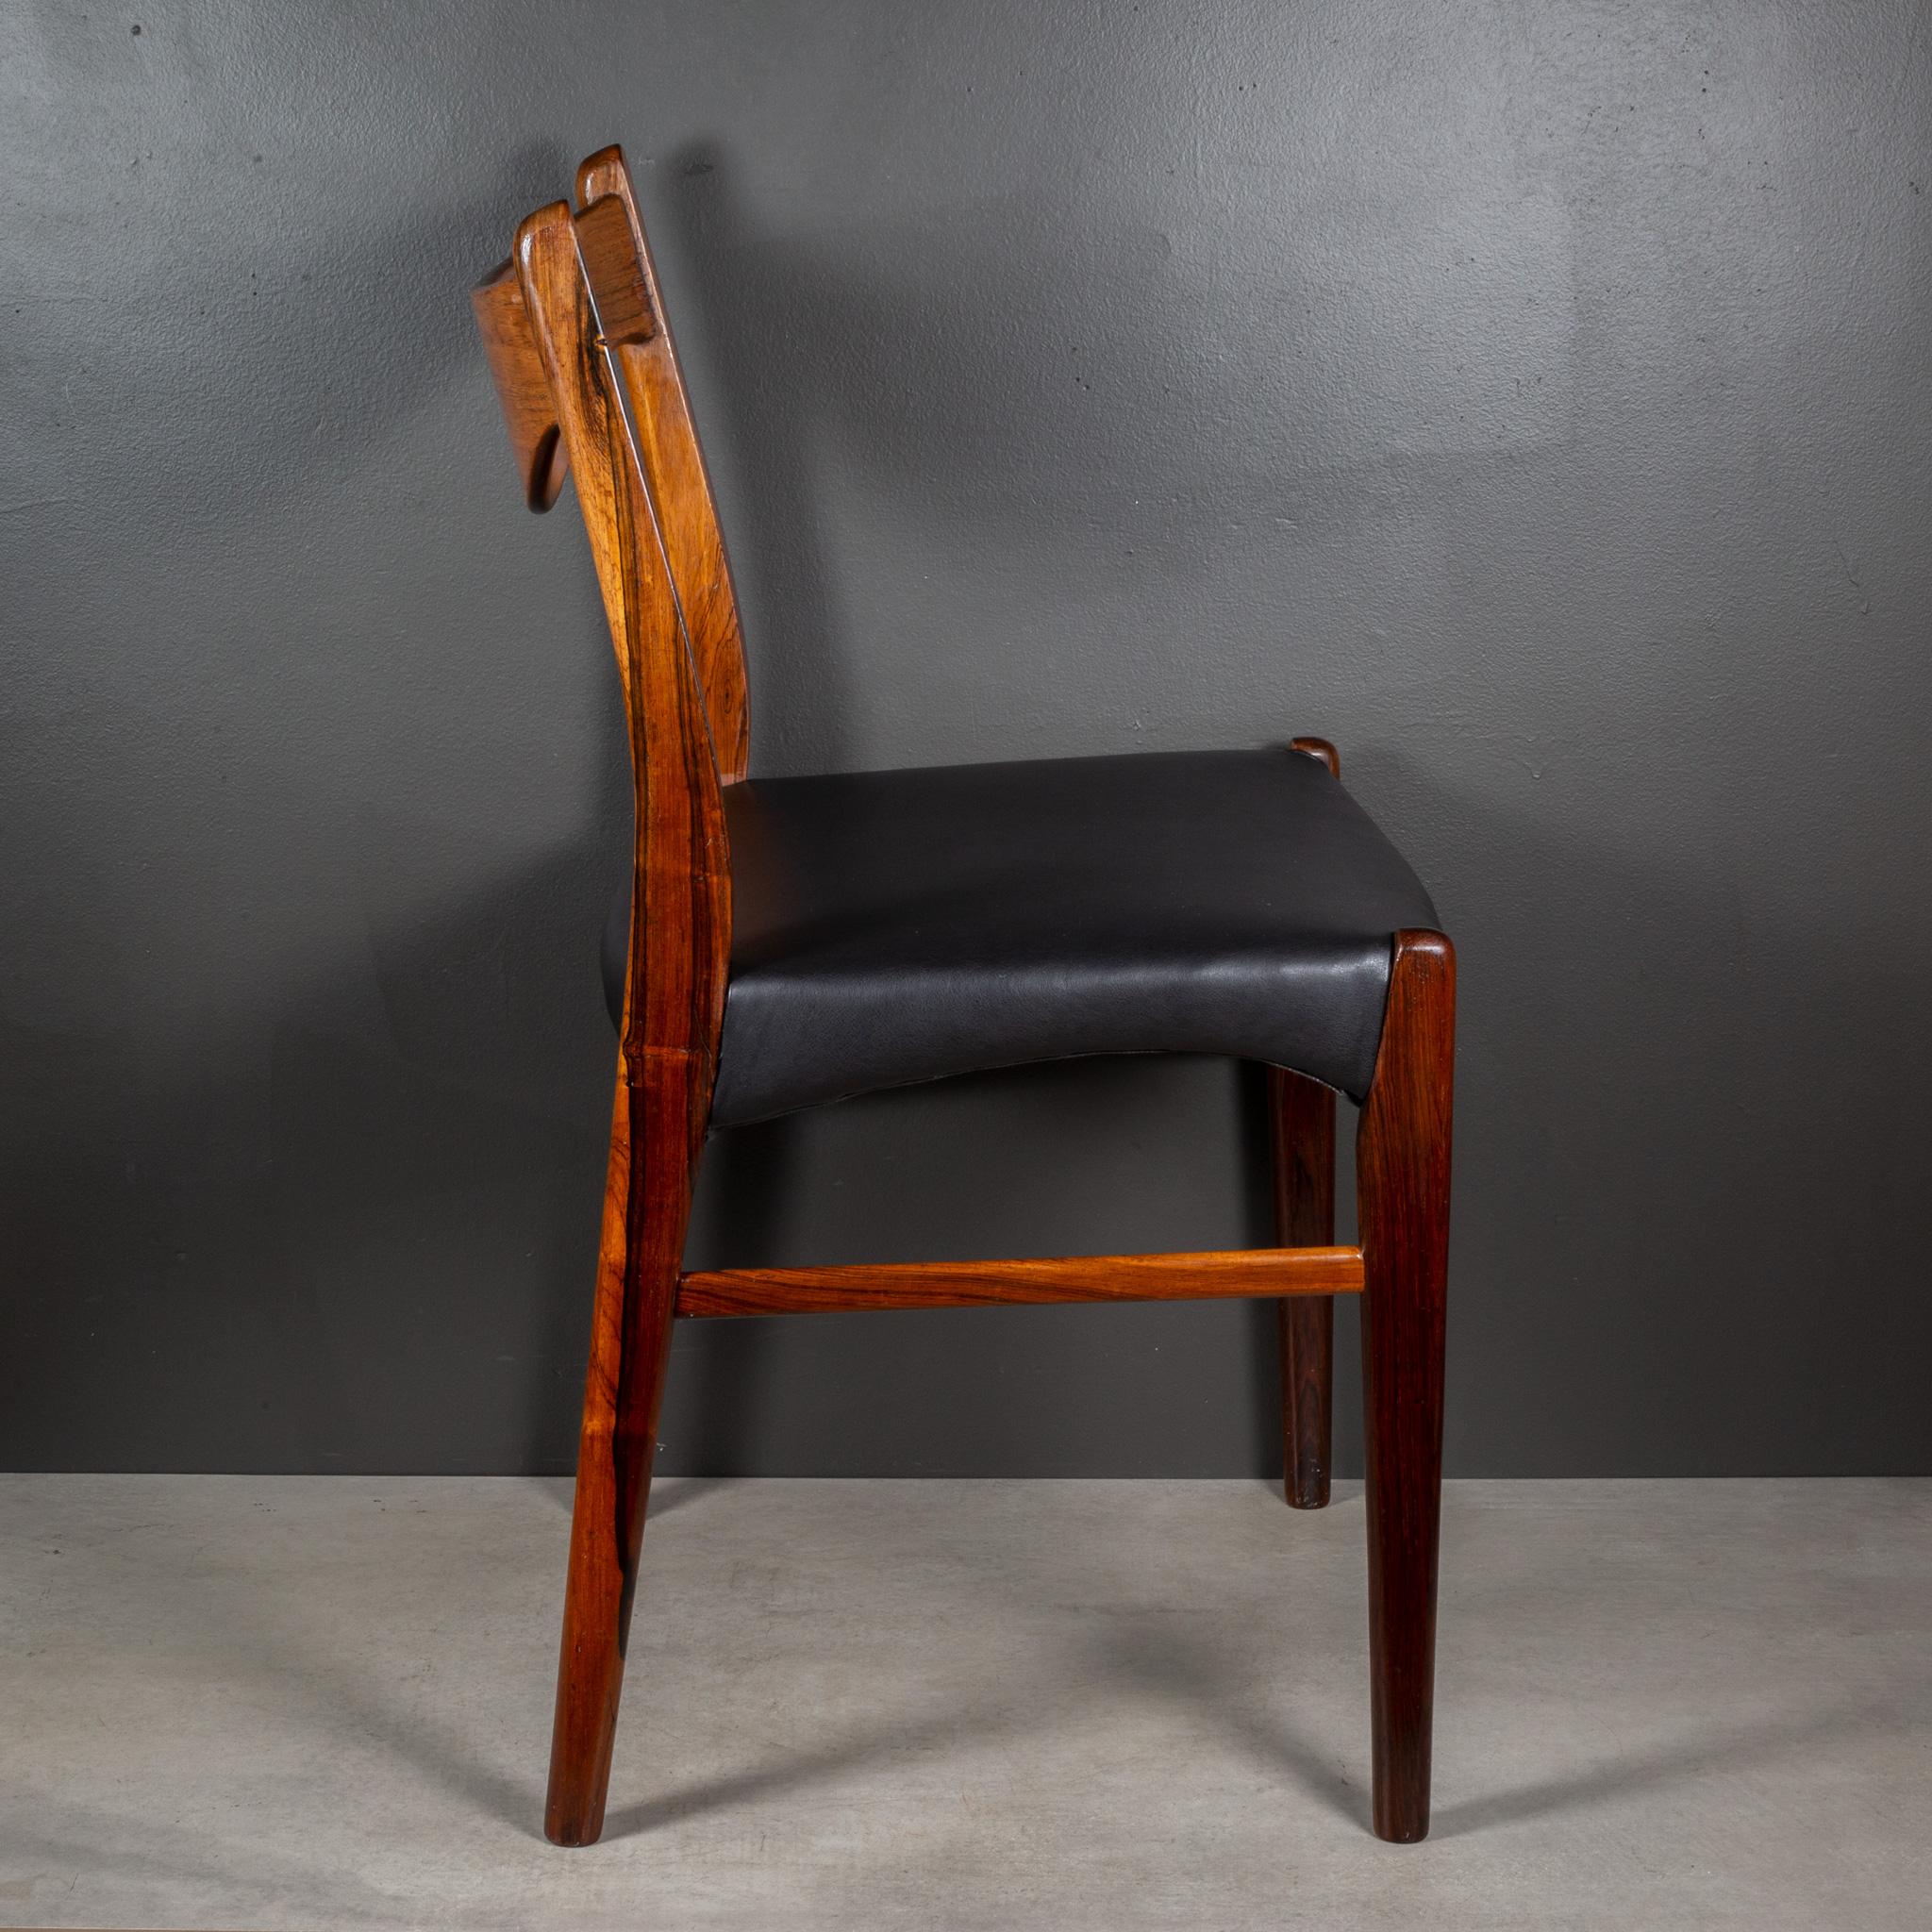 Arne Wahl Iversen Model GS61 Rosewood and Leather Dining Chairs c.1950 For Sale 8